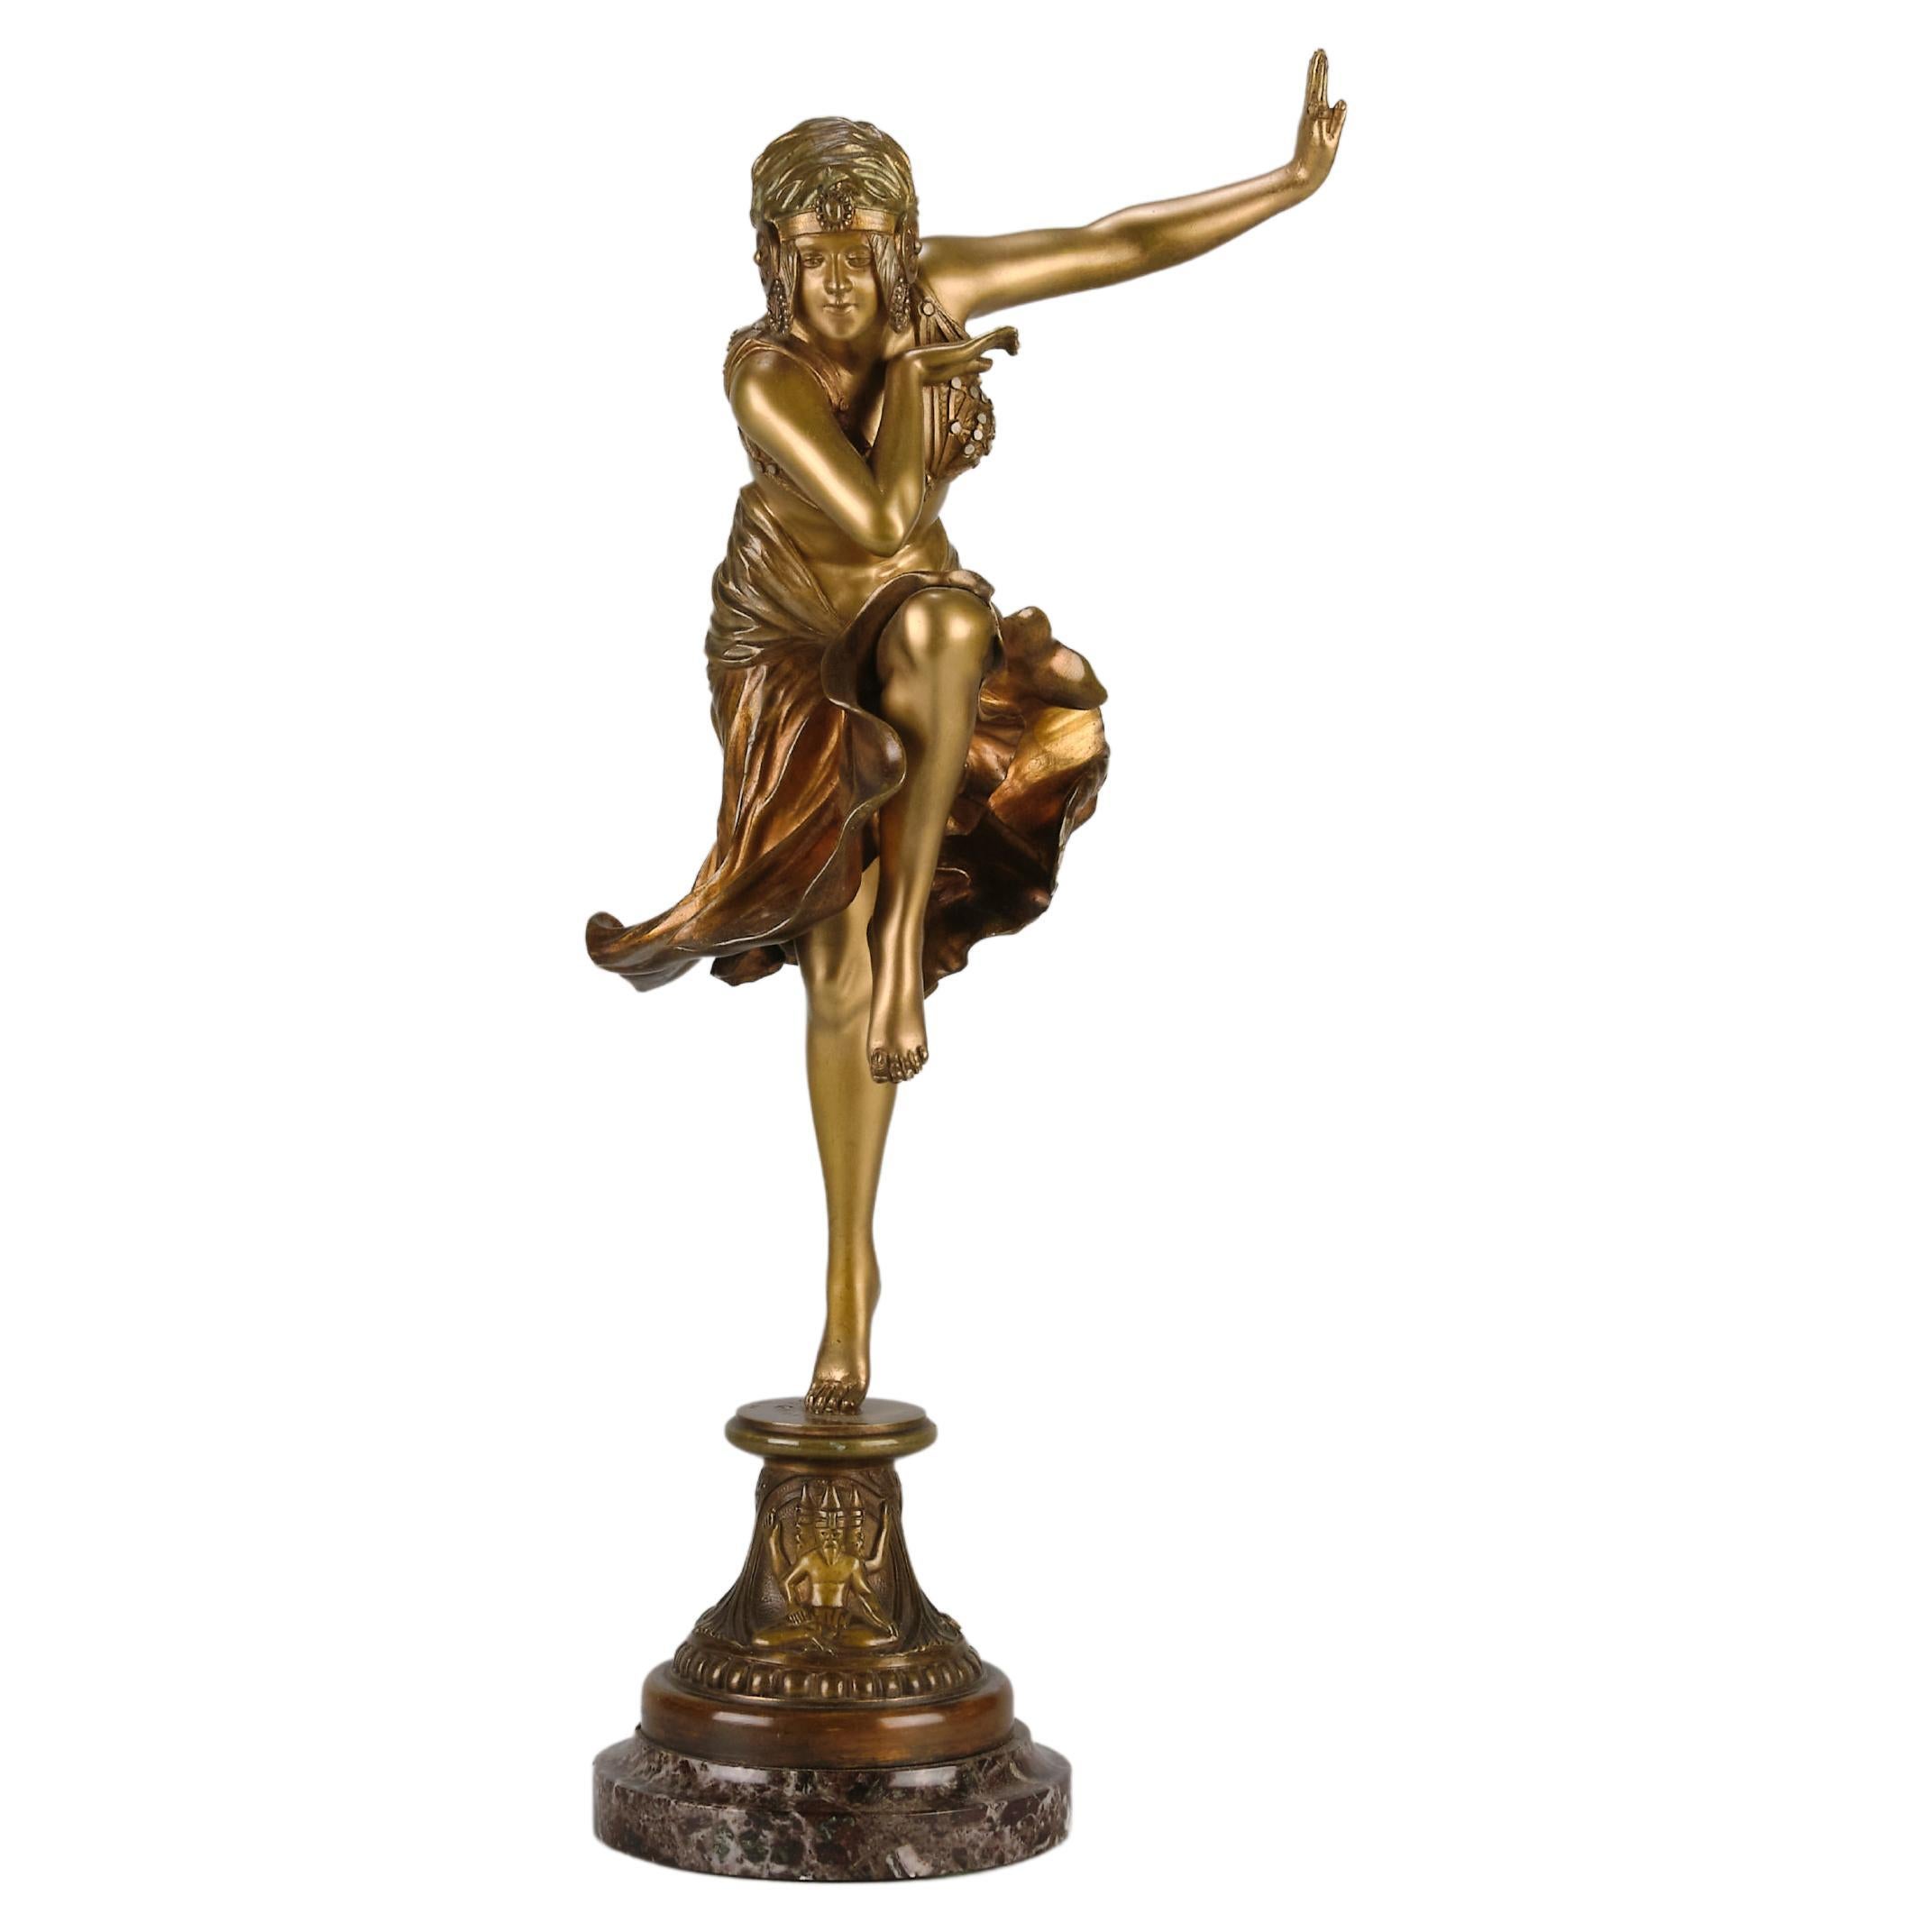 Early 20th Century Gilt Bronze Entitled "Hindu Dancer" by Claire Colinet For Sale